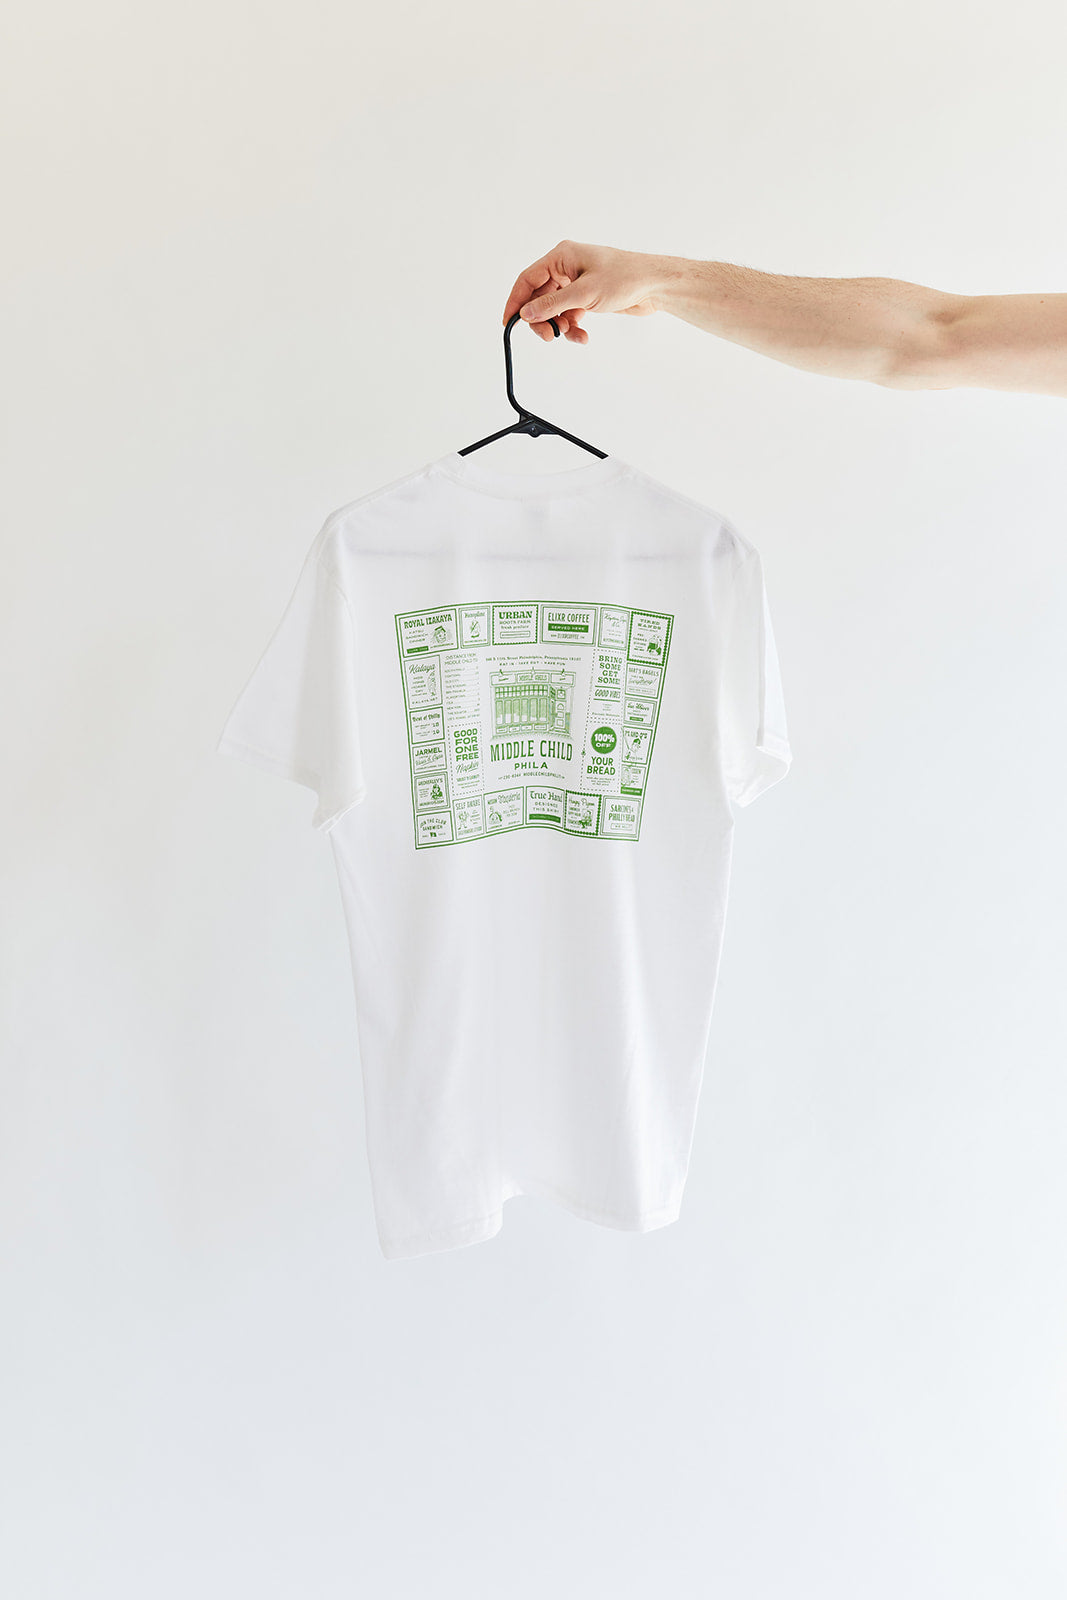 True Hand Society "Placemat" Short-Sleeve Tee